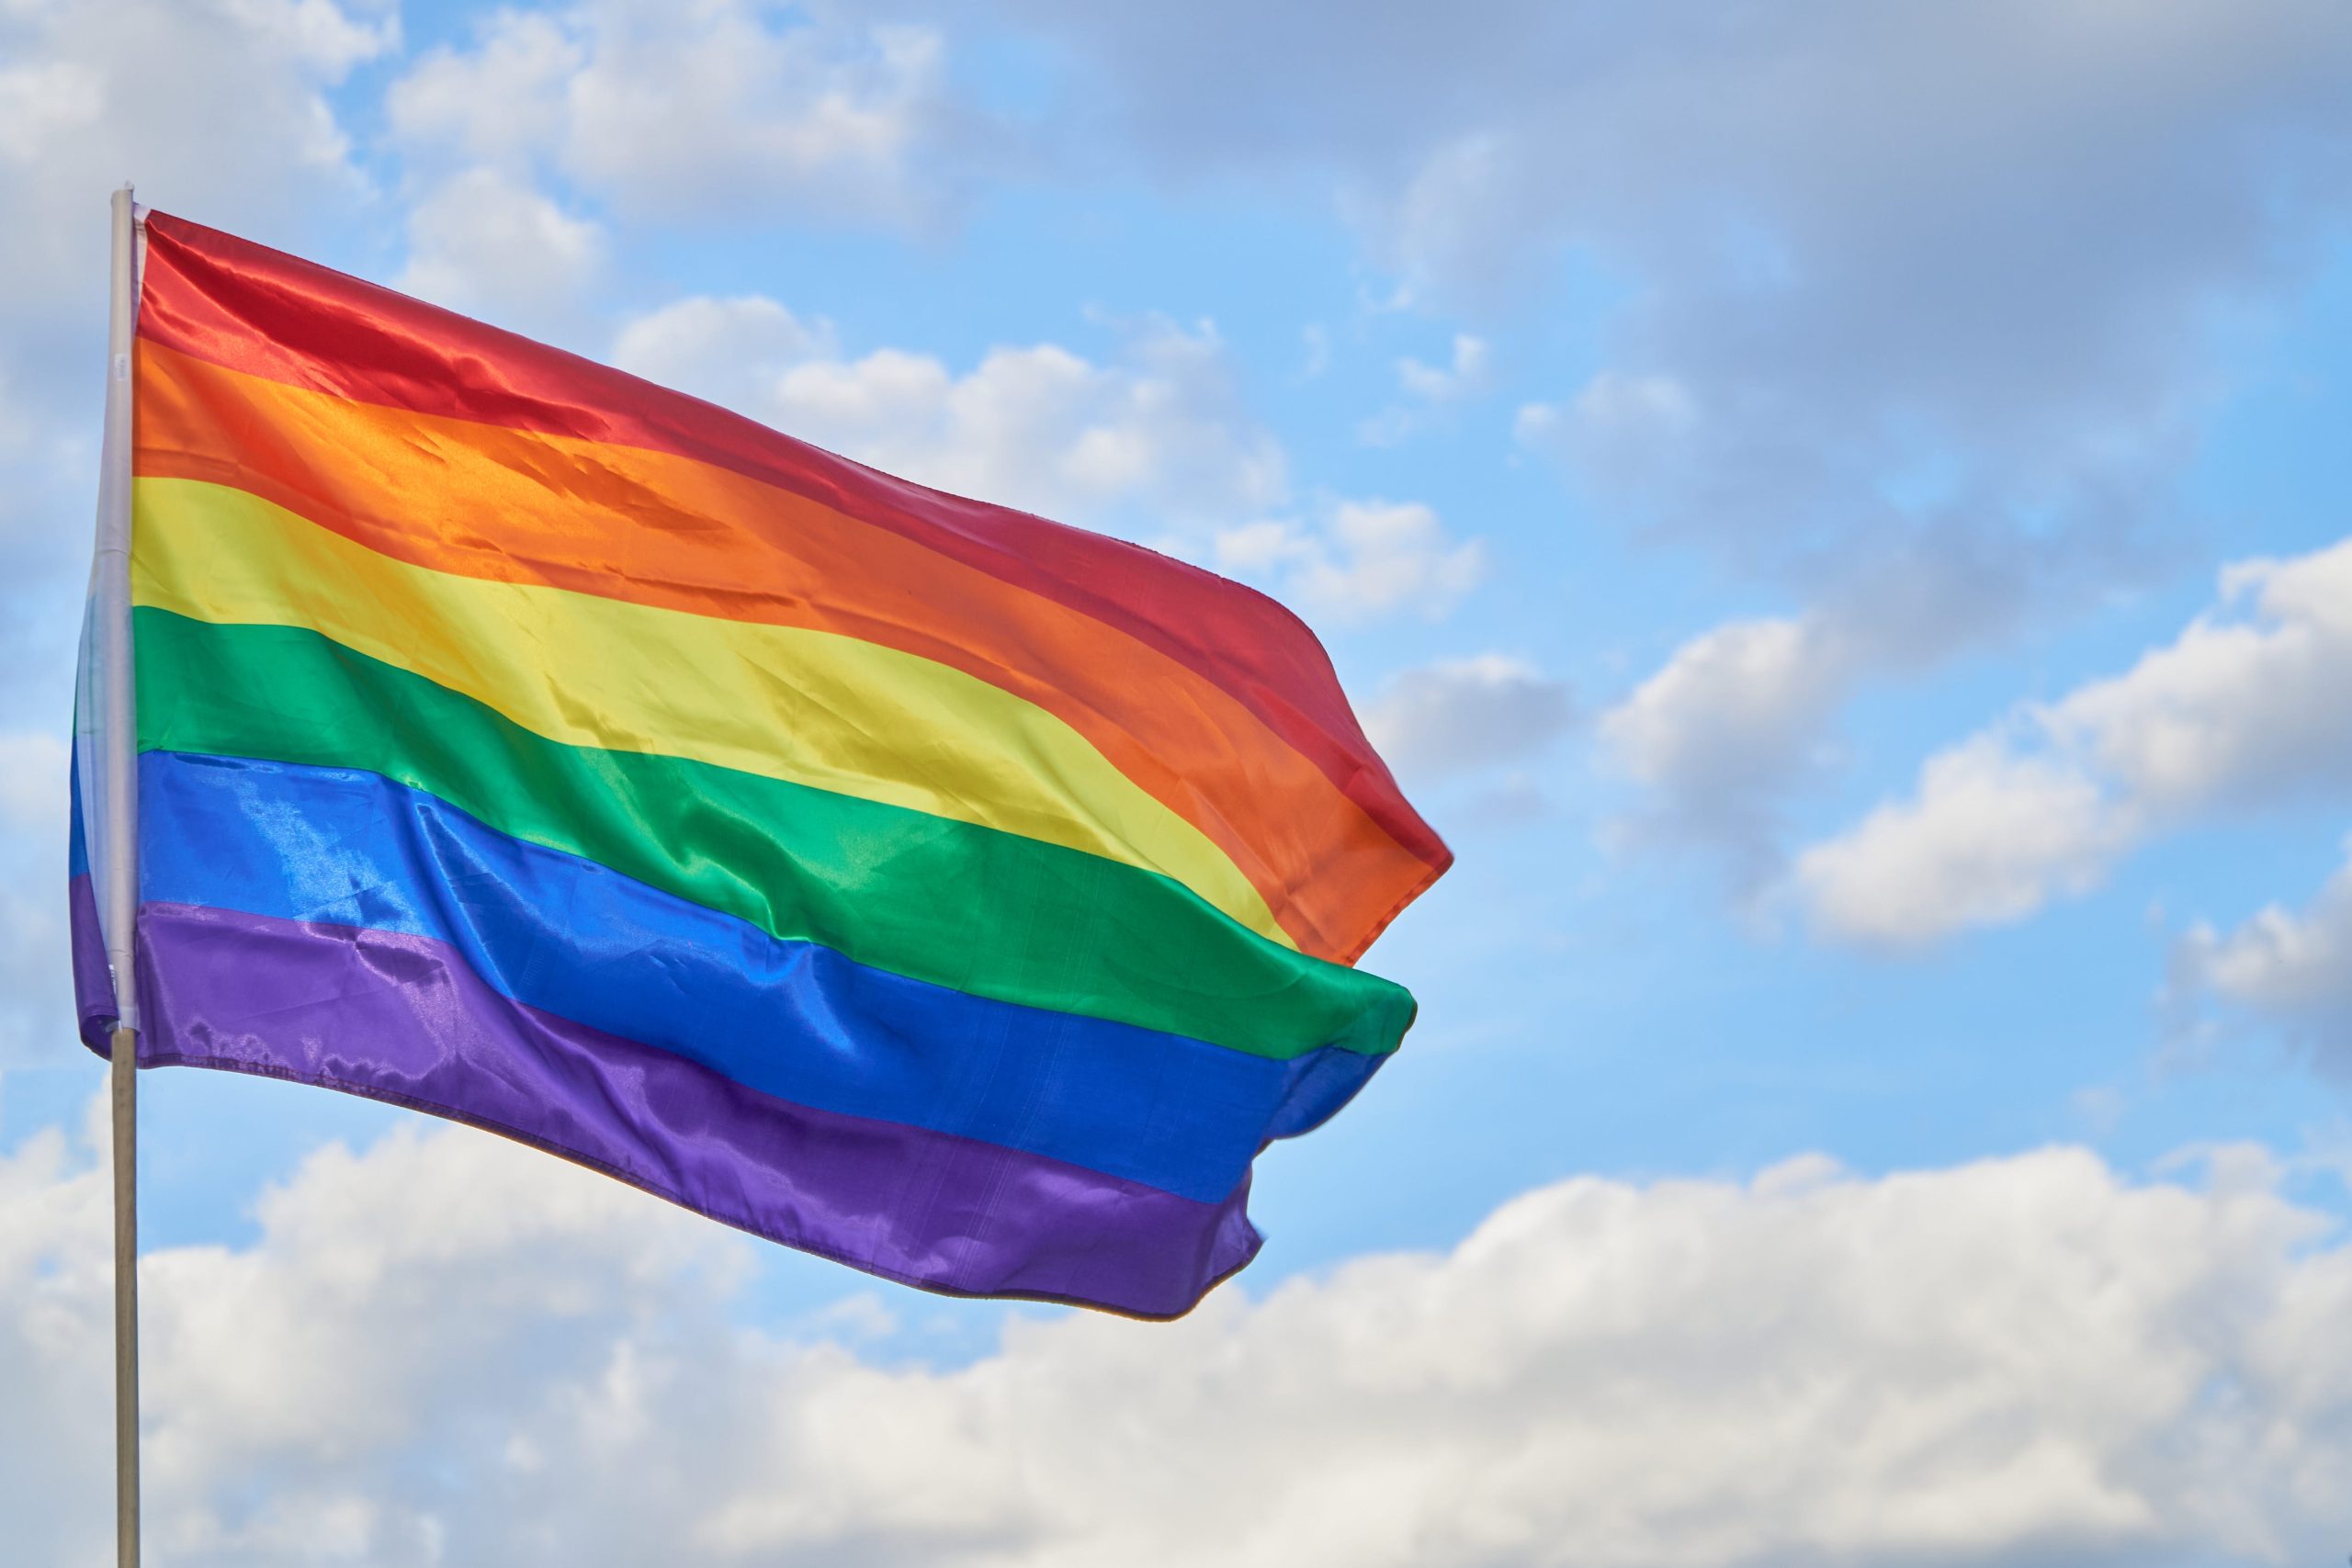 Park Ridge to host its first-ever Pride Parade this summer [Video]